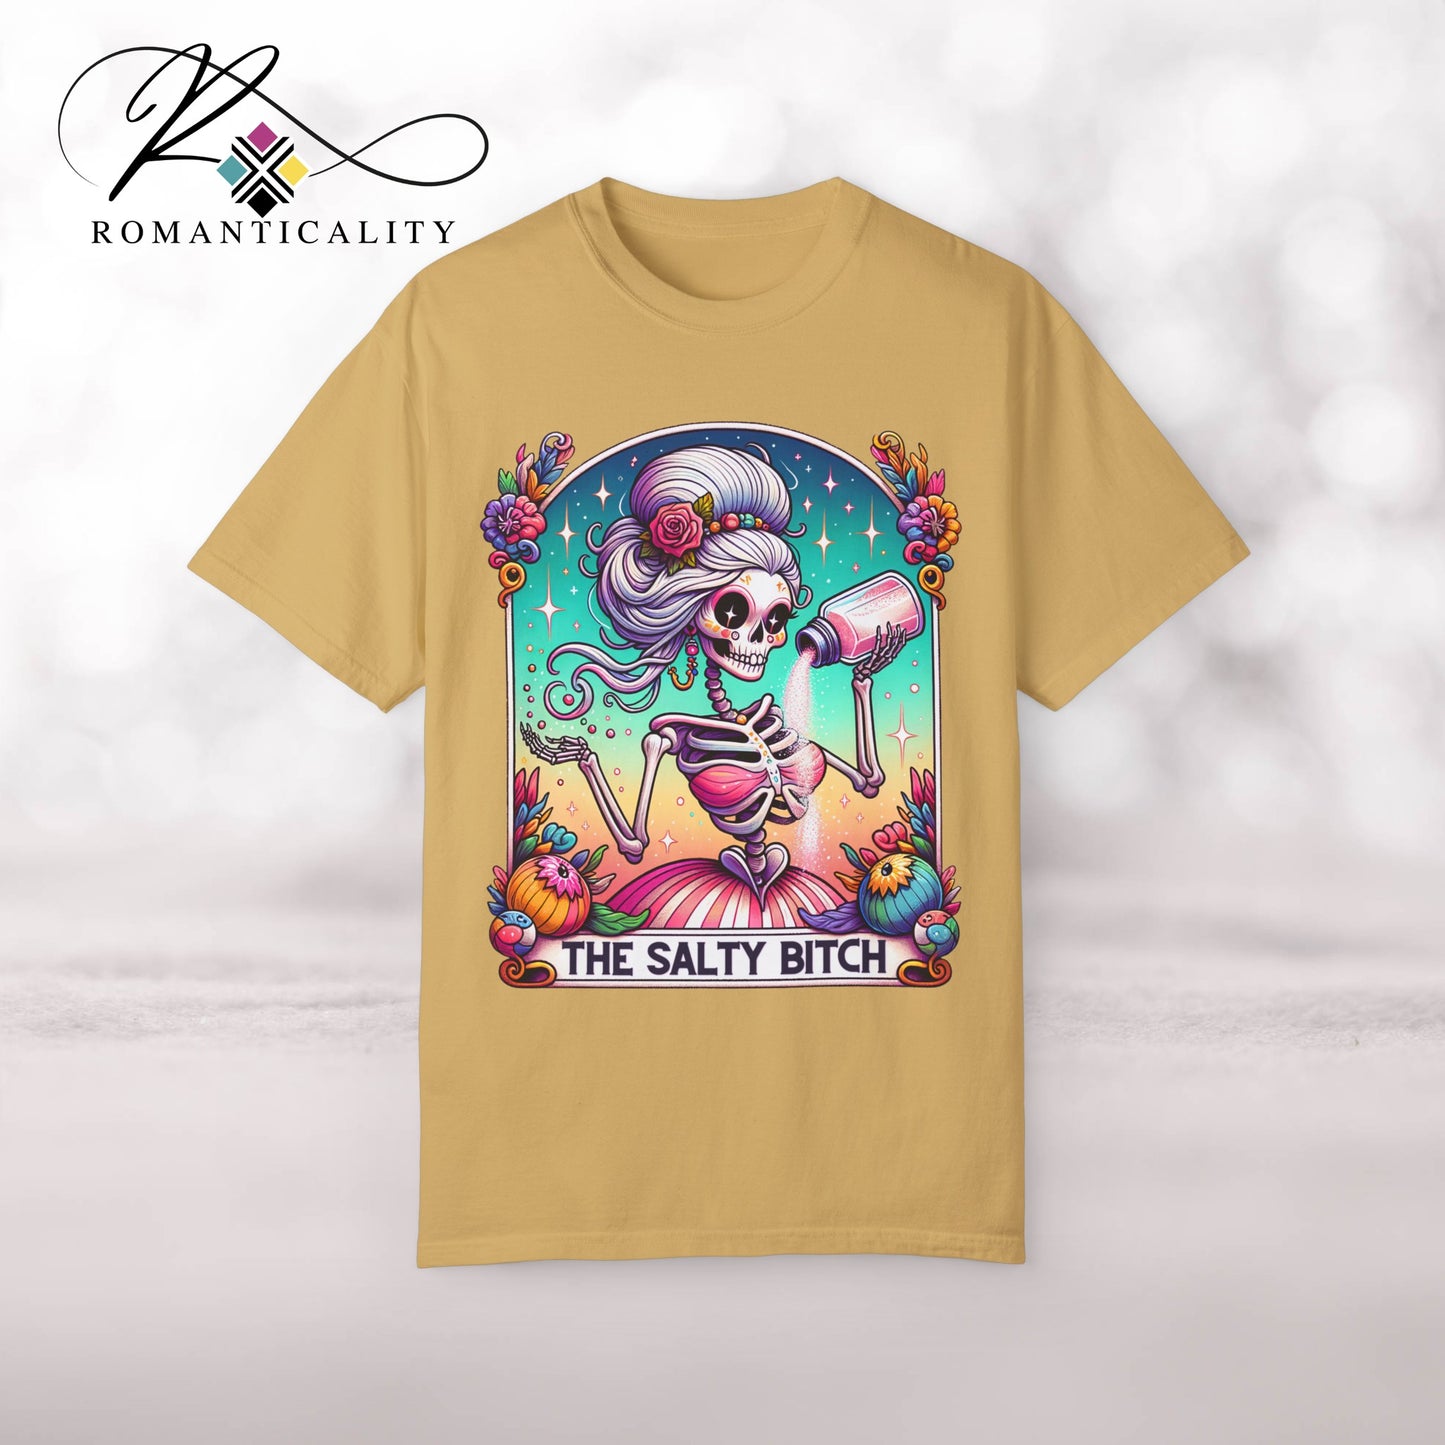 The Salty Bitch Tarot Graphic T-Shirt-Humorous Top-Color Tee-Unisex Graphic Tee-Tarot Card Graphic T-shirt-Giftful-Gift-Funny Quote Top